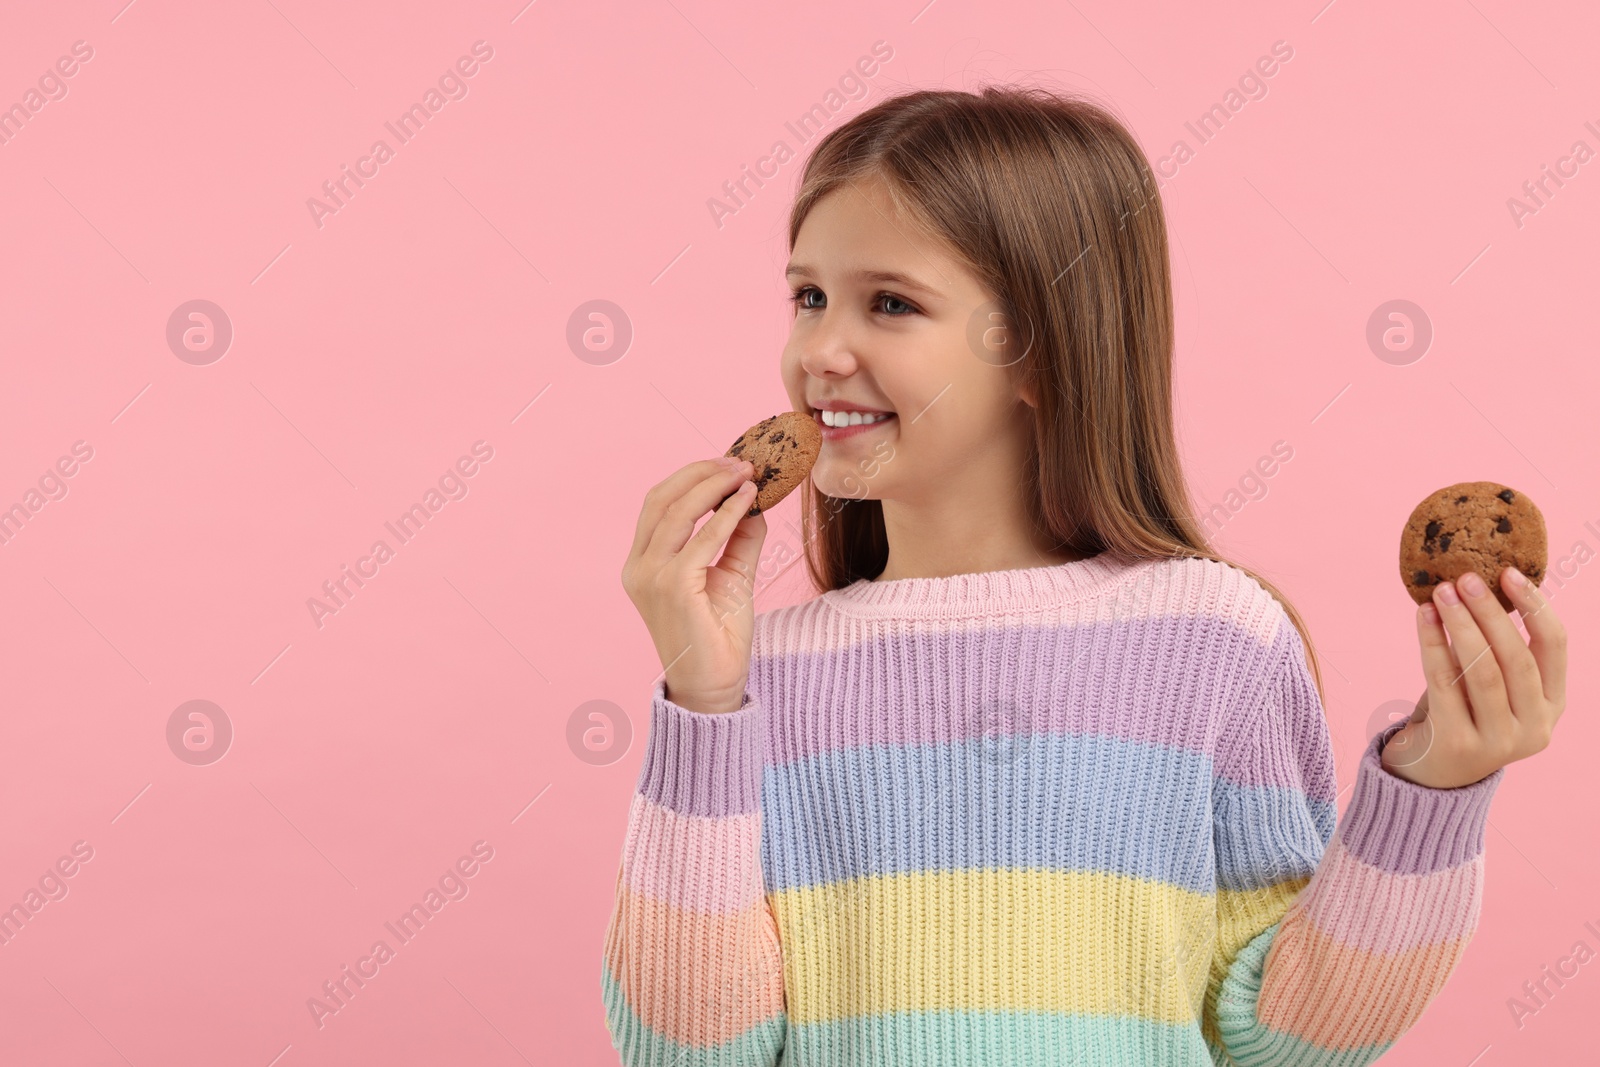 Photo of Cute girl with chocolate chip cookies on pink background. Space for text